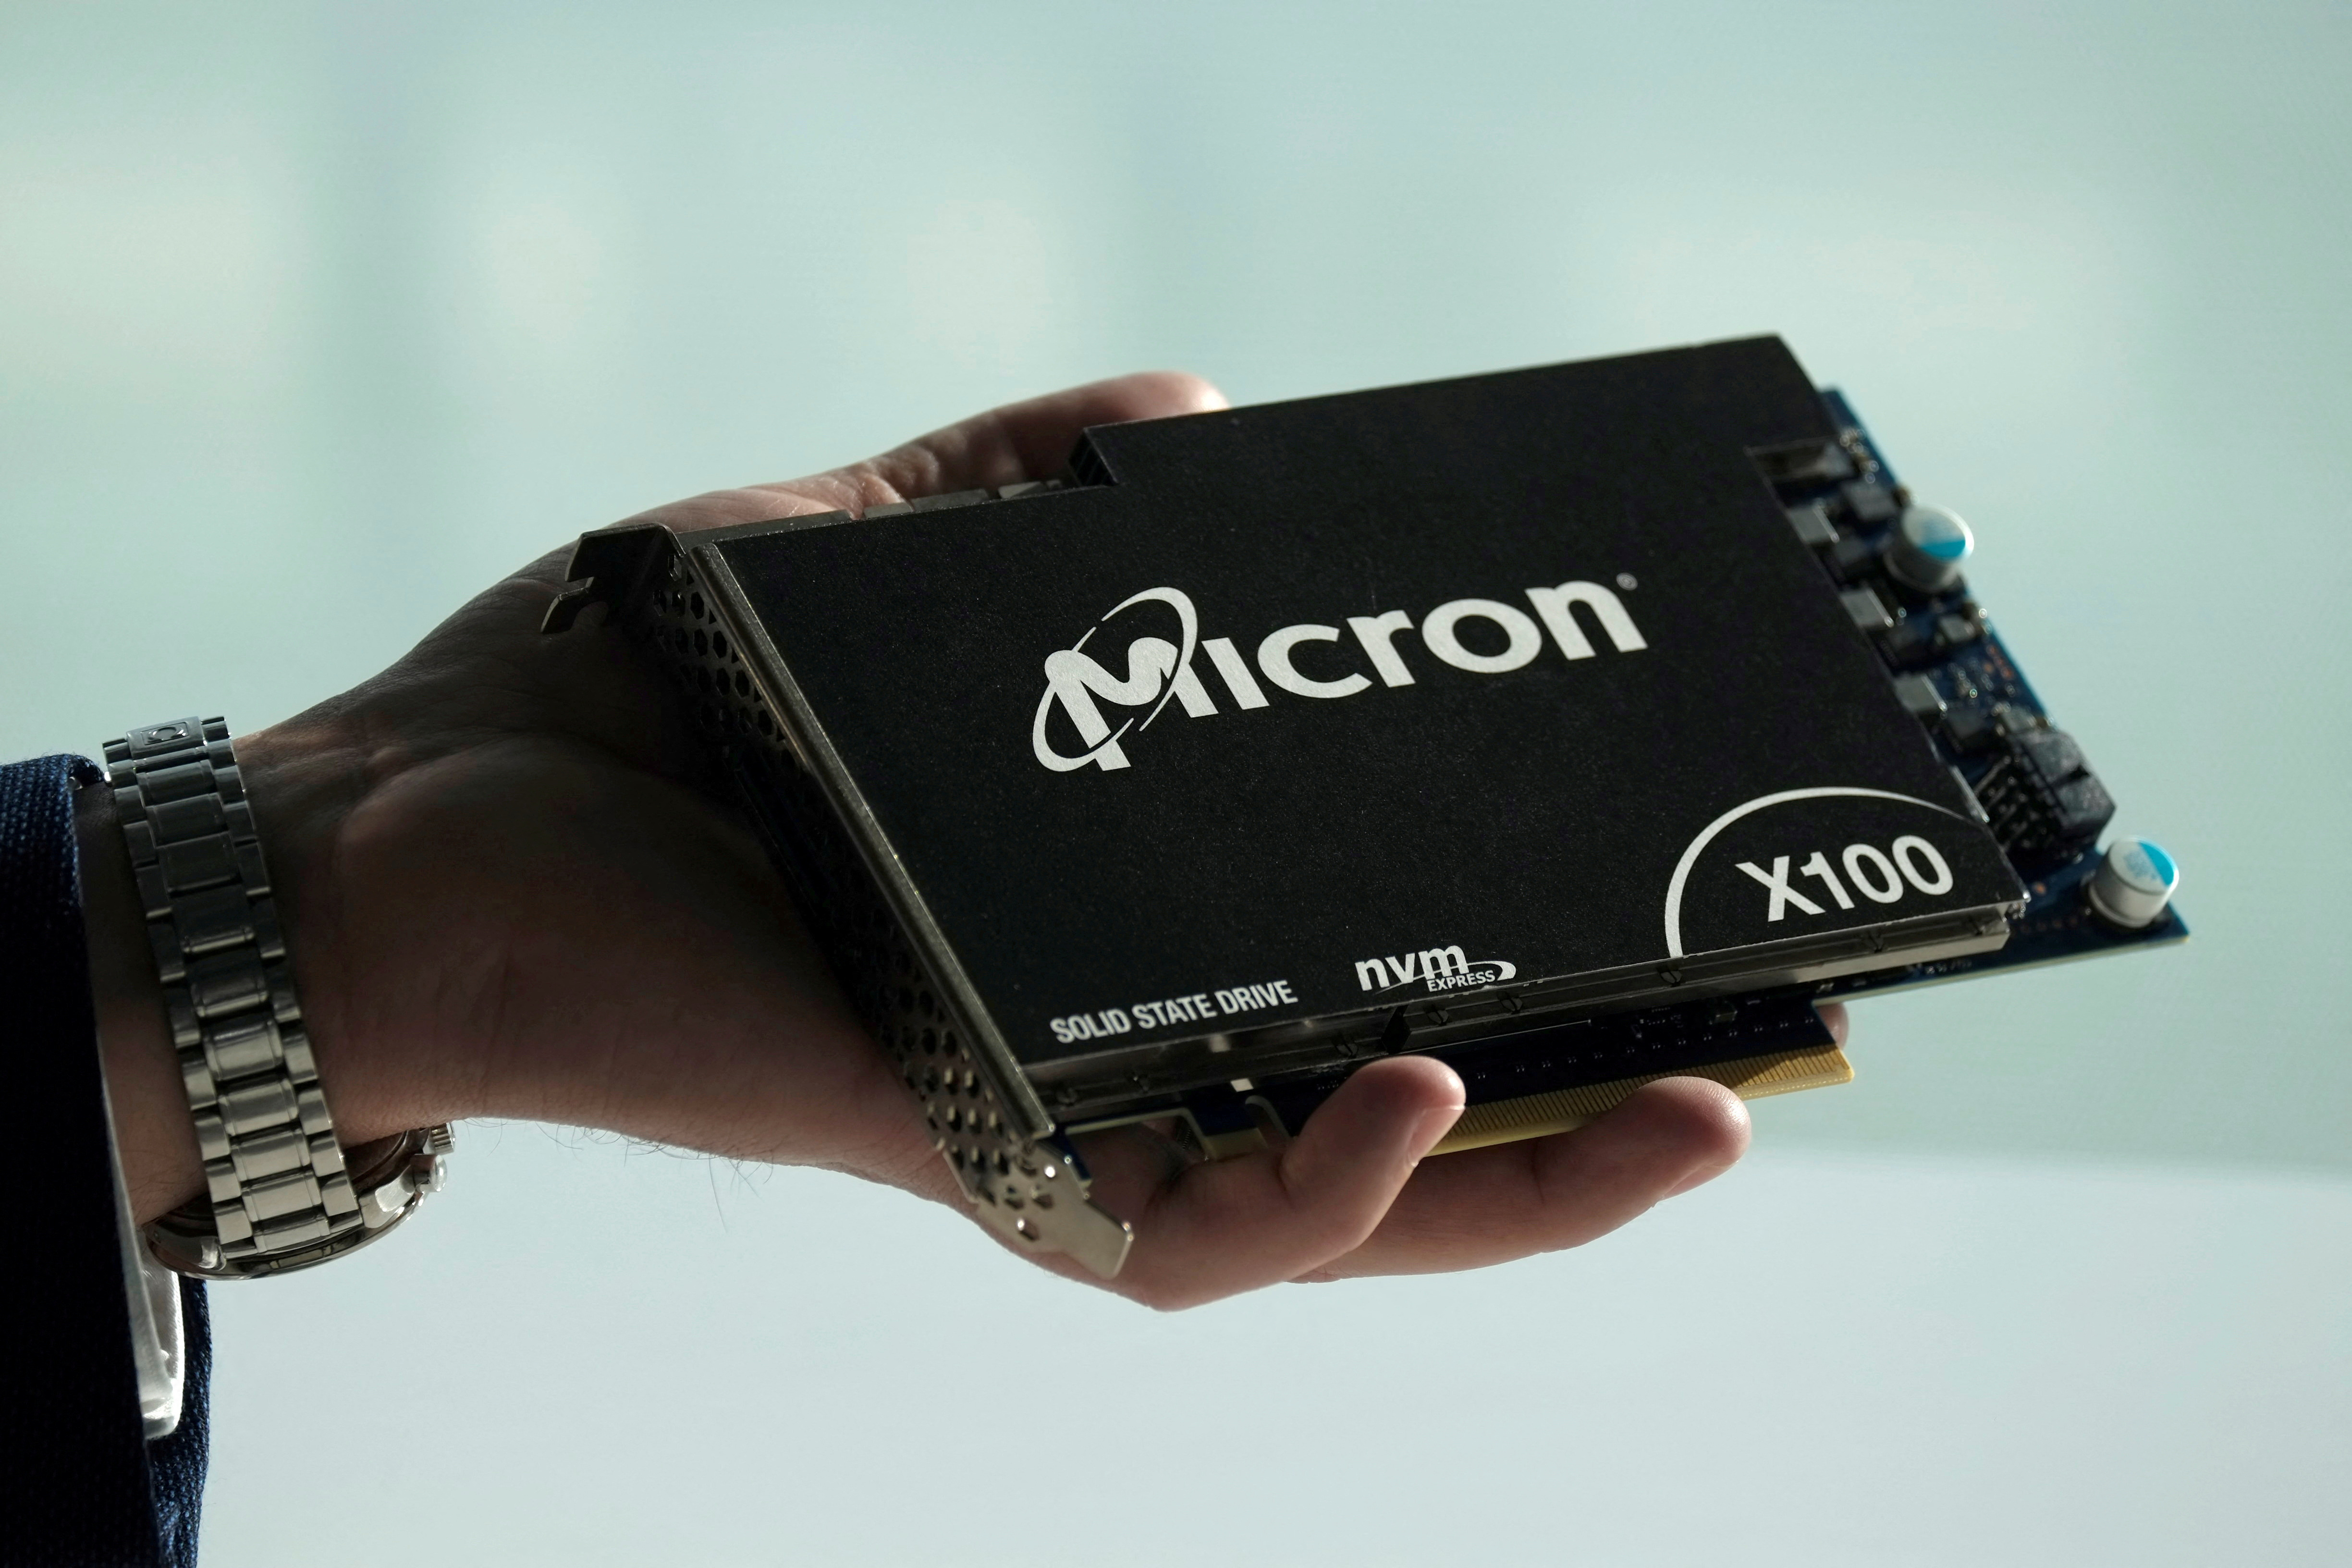 Micron Technology's solid-state drive for data center customers is presented at a product launch event in San Francisco